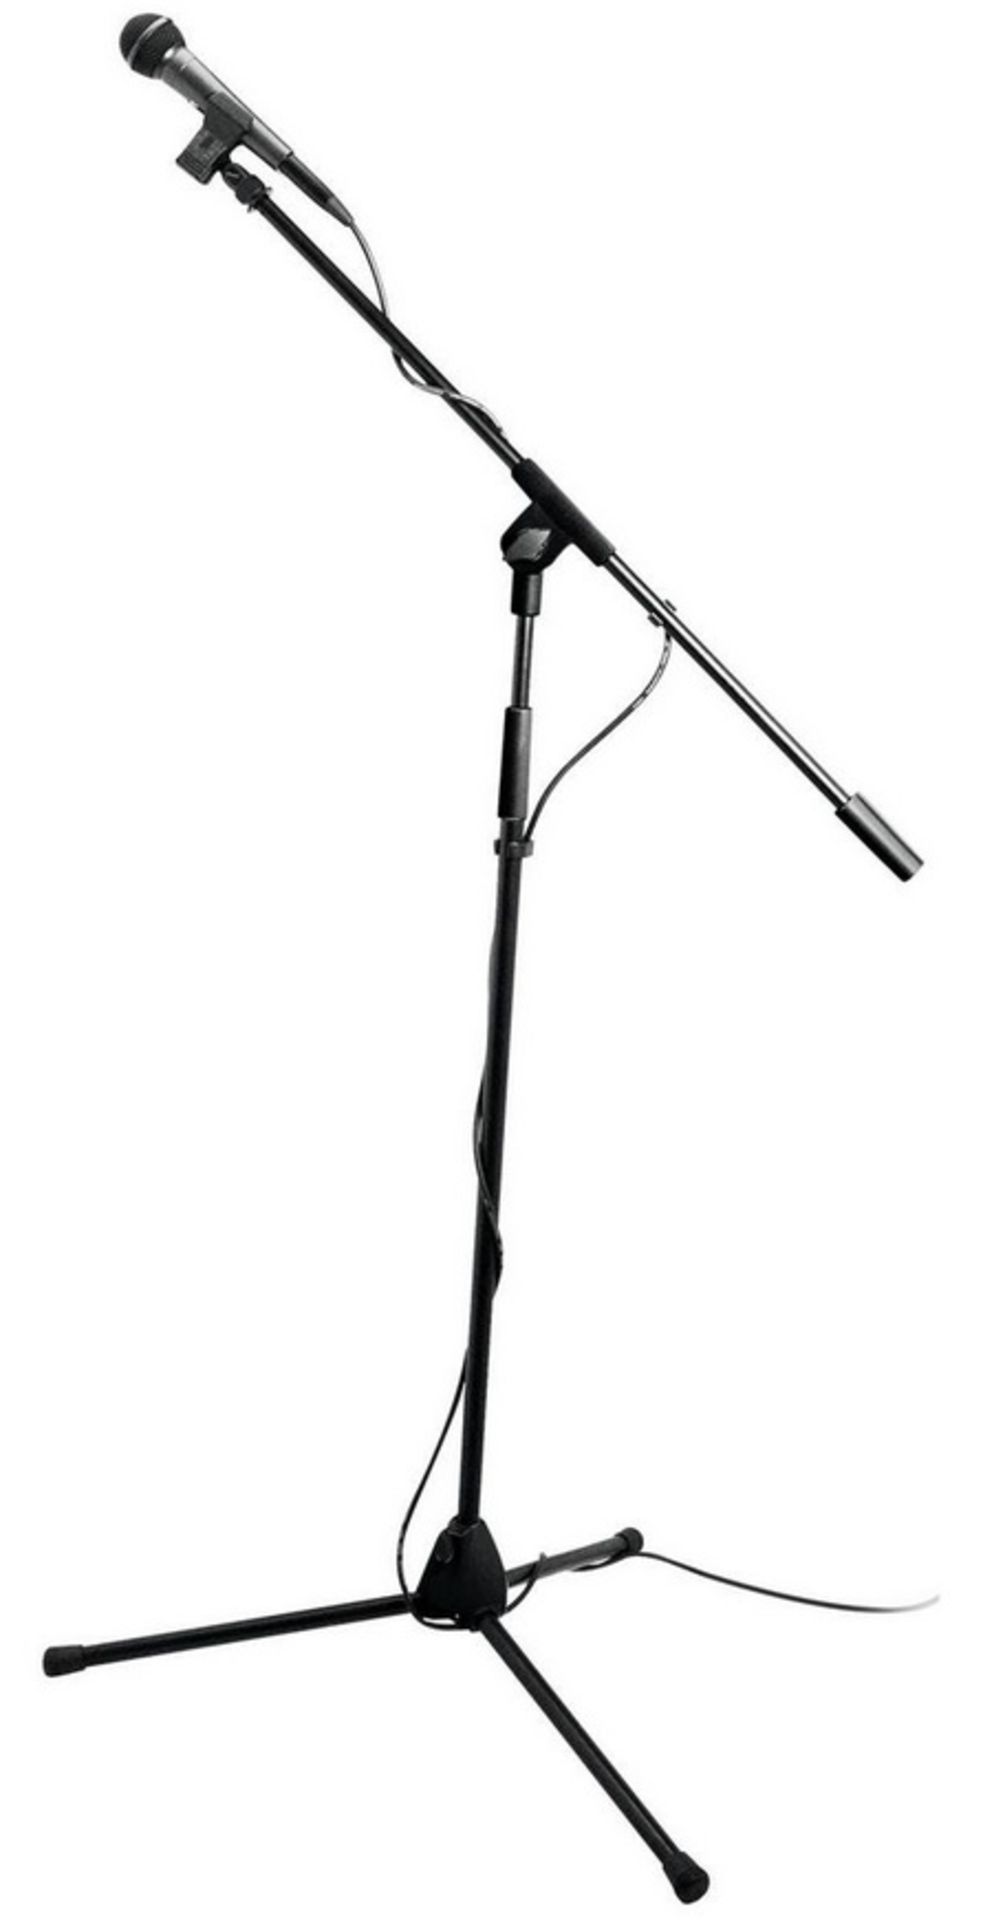 1 x On-Stage Microphone Pro-Pak with AS400 Dynamic Handheld Microphone - Includes Tripod Boom Stand,